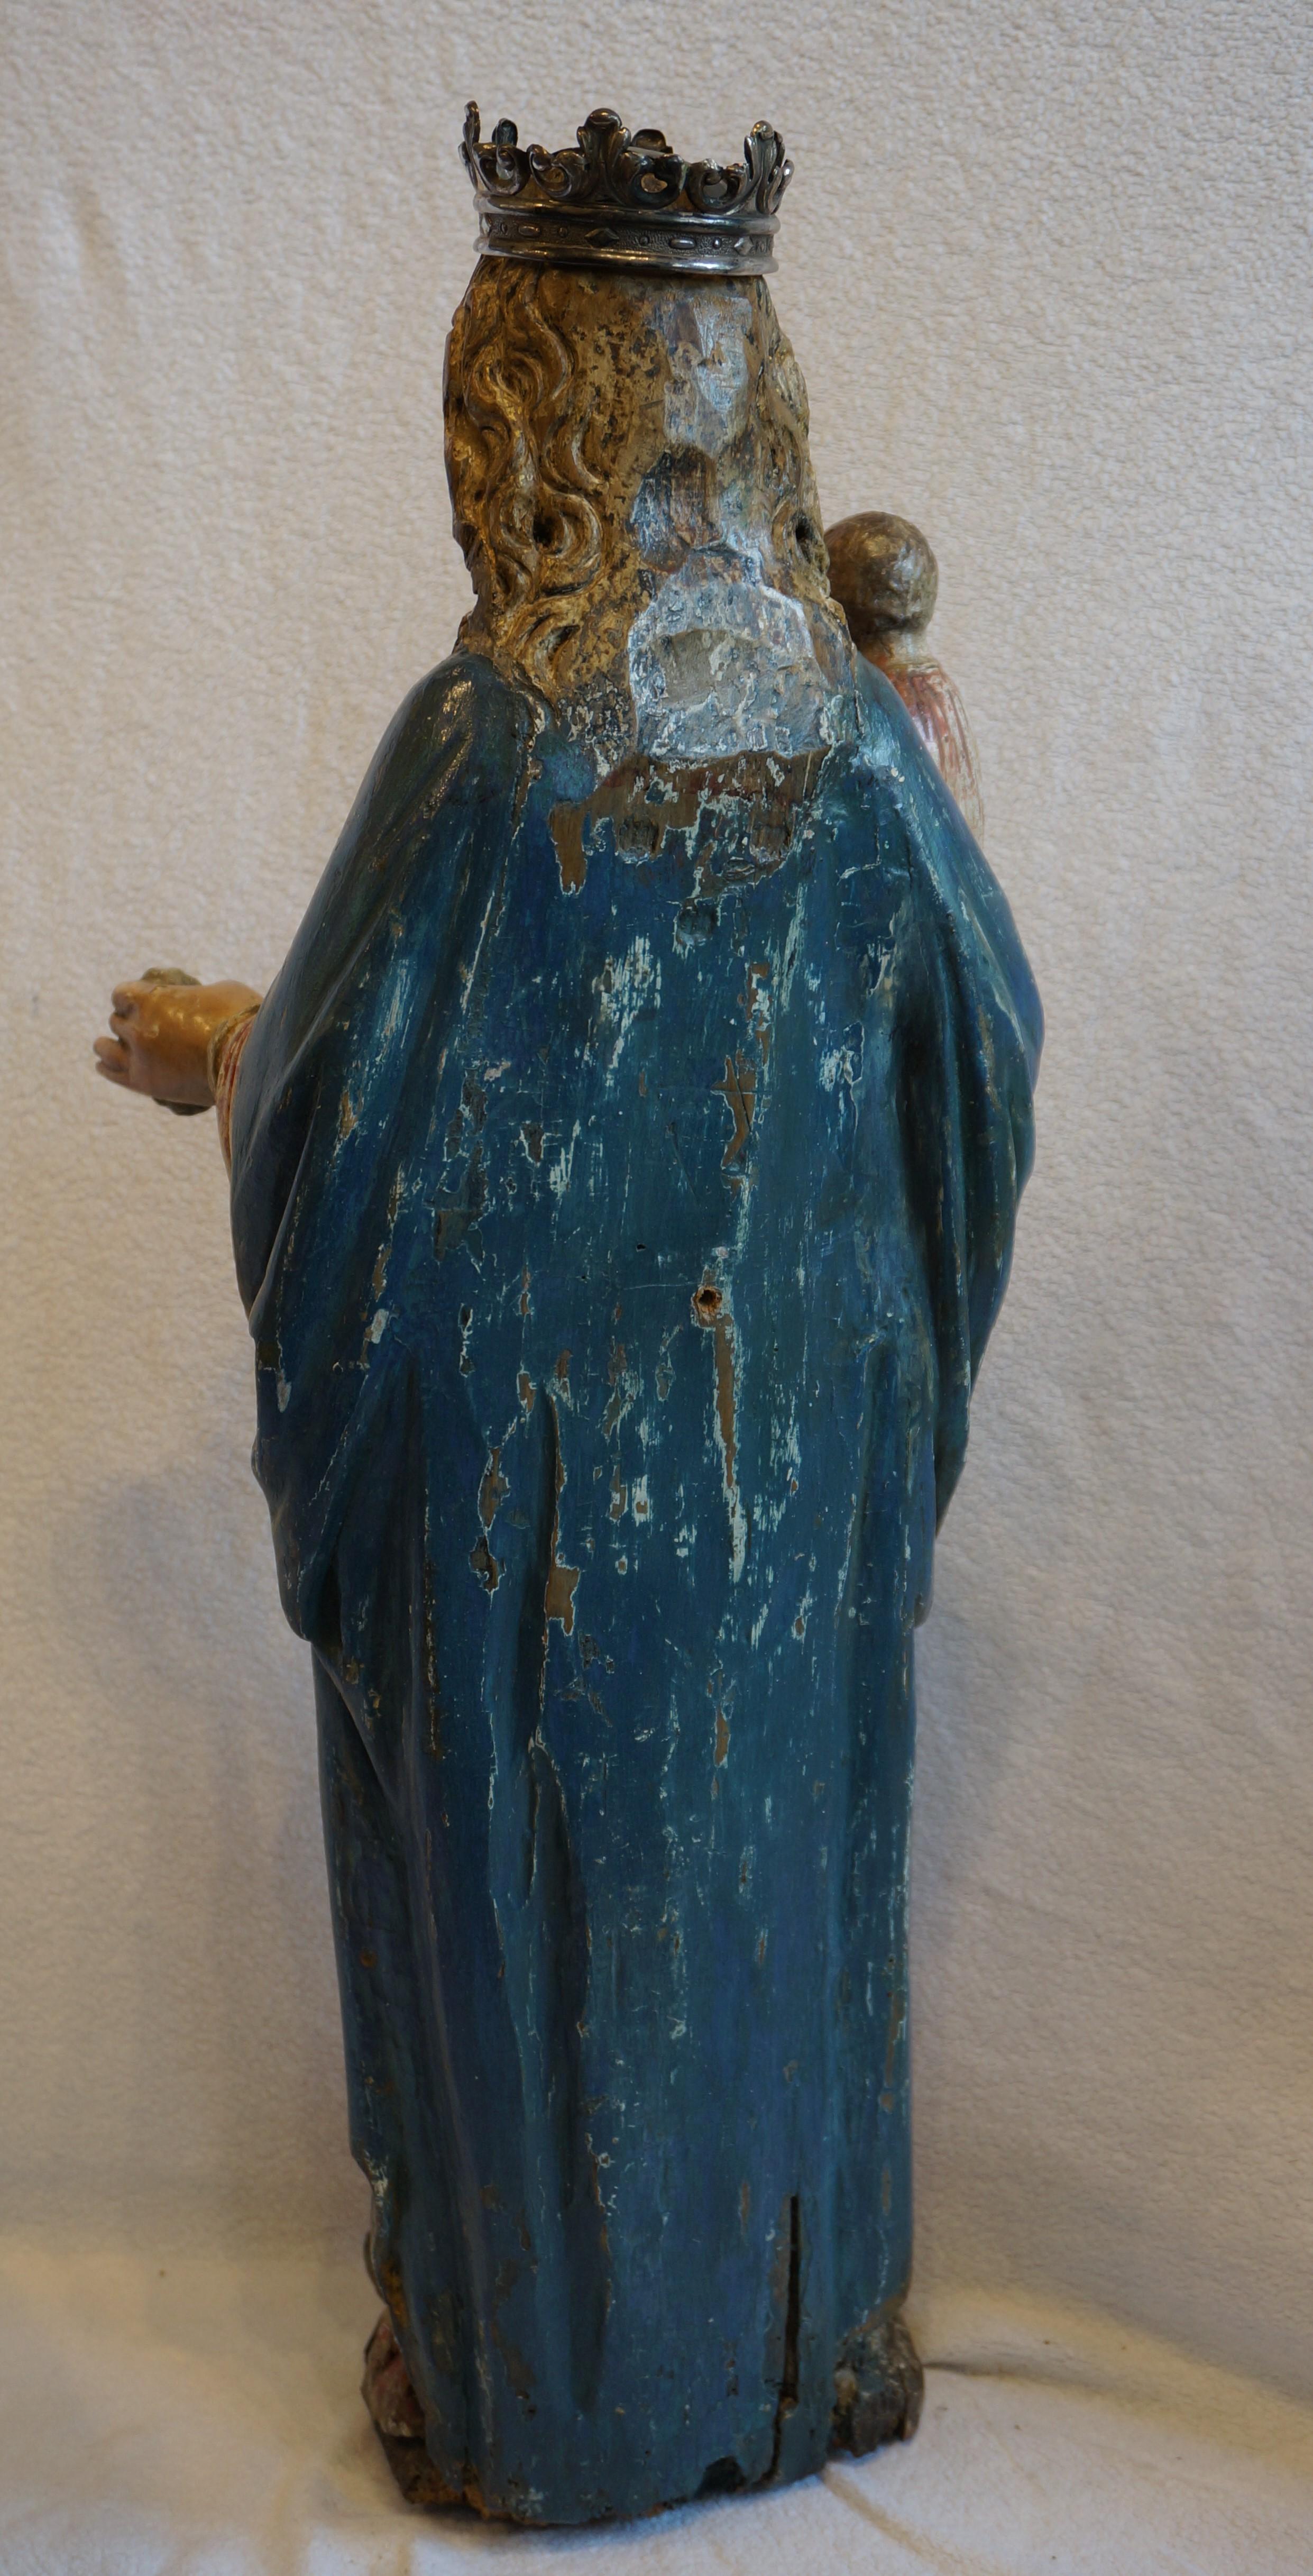 Antique Sculpture of Mary with the Child Jesus, Belgium, early 17th century For Sale 11